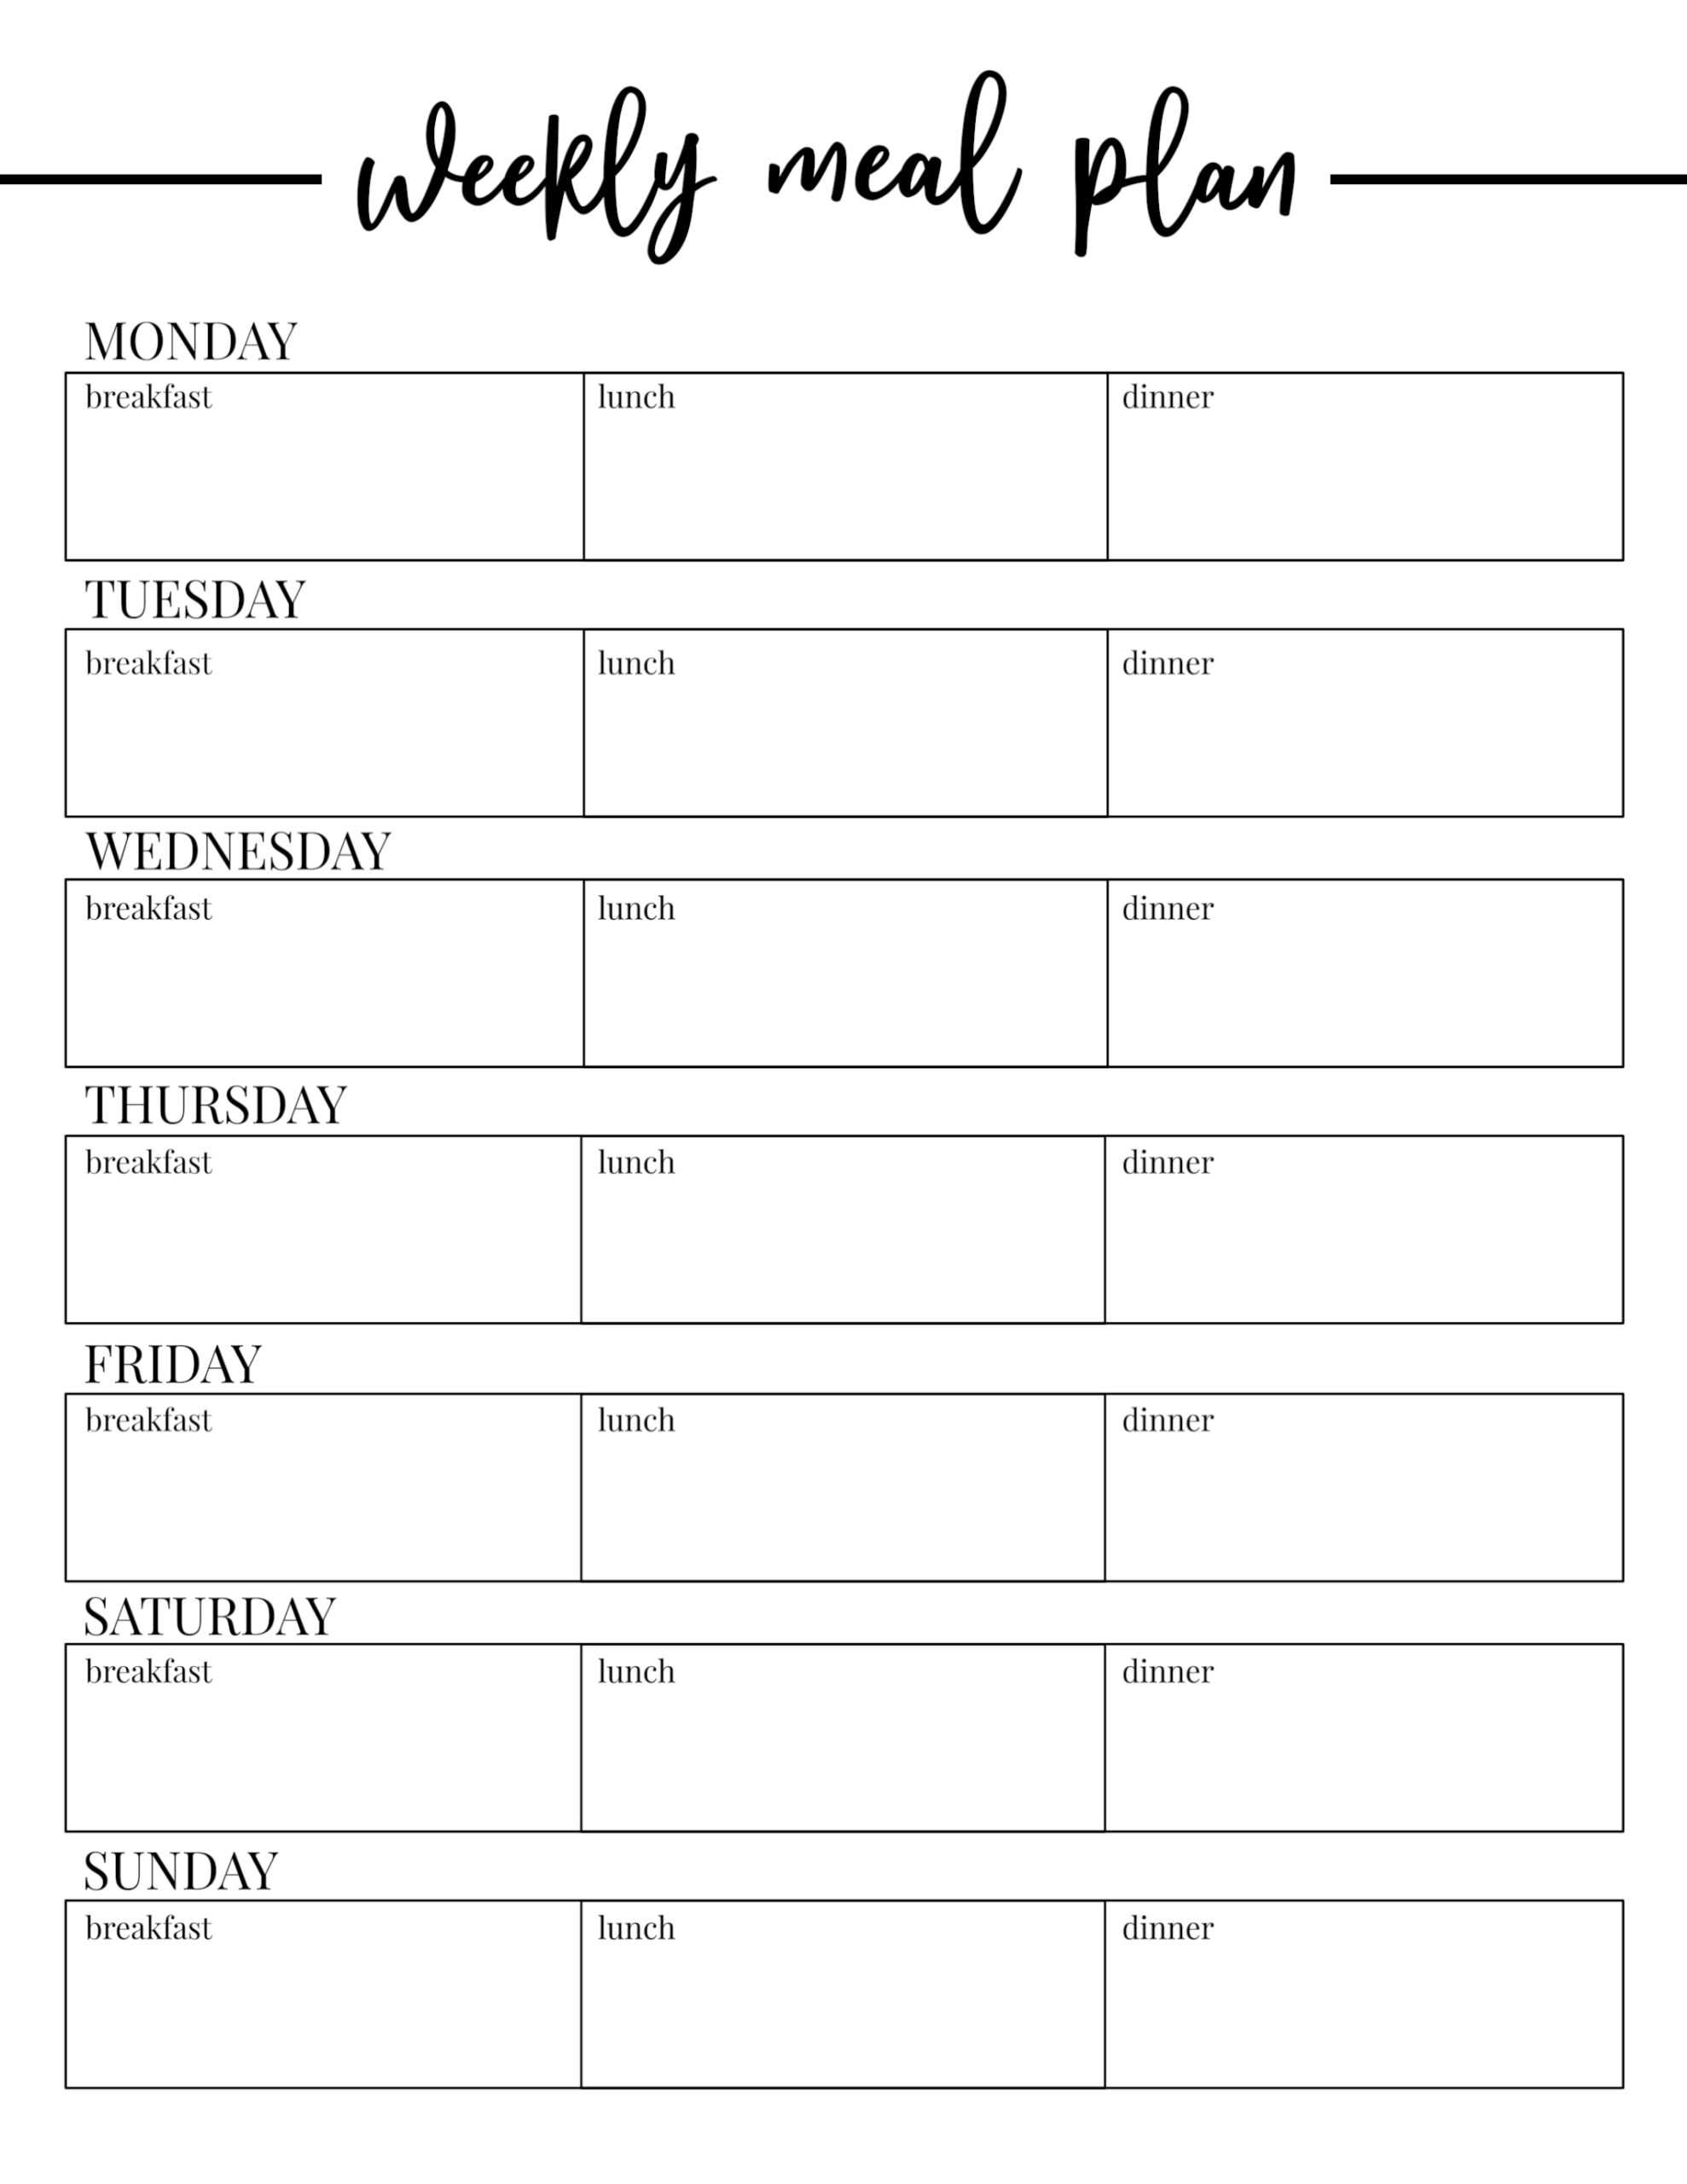 005 Free Meal Planner Template Word Ideas Weekly Plan Within Menu Planning Template Word